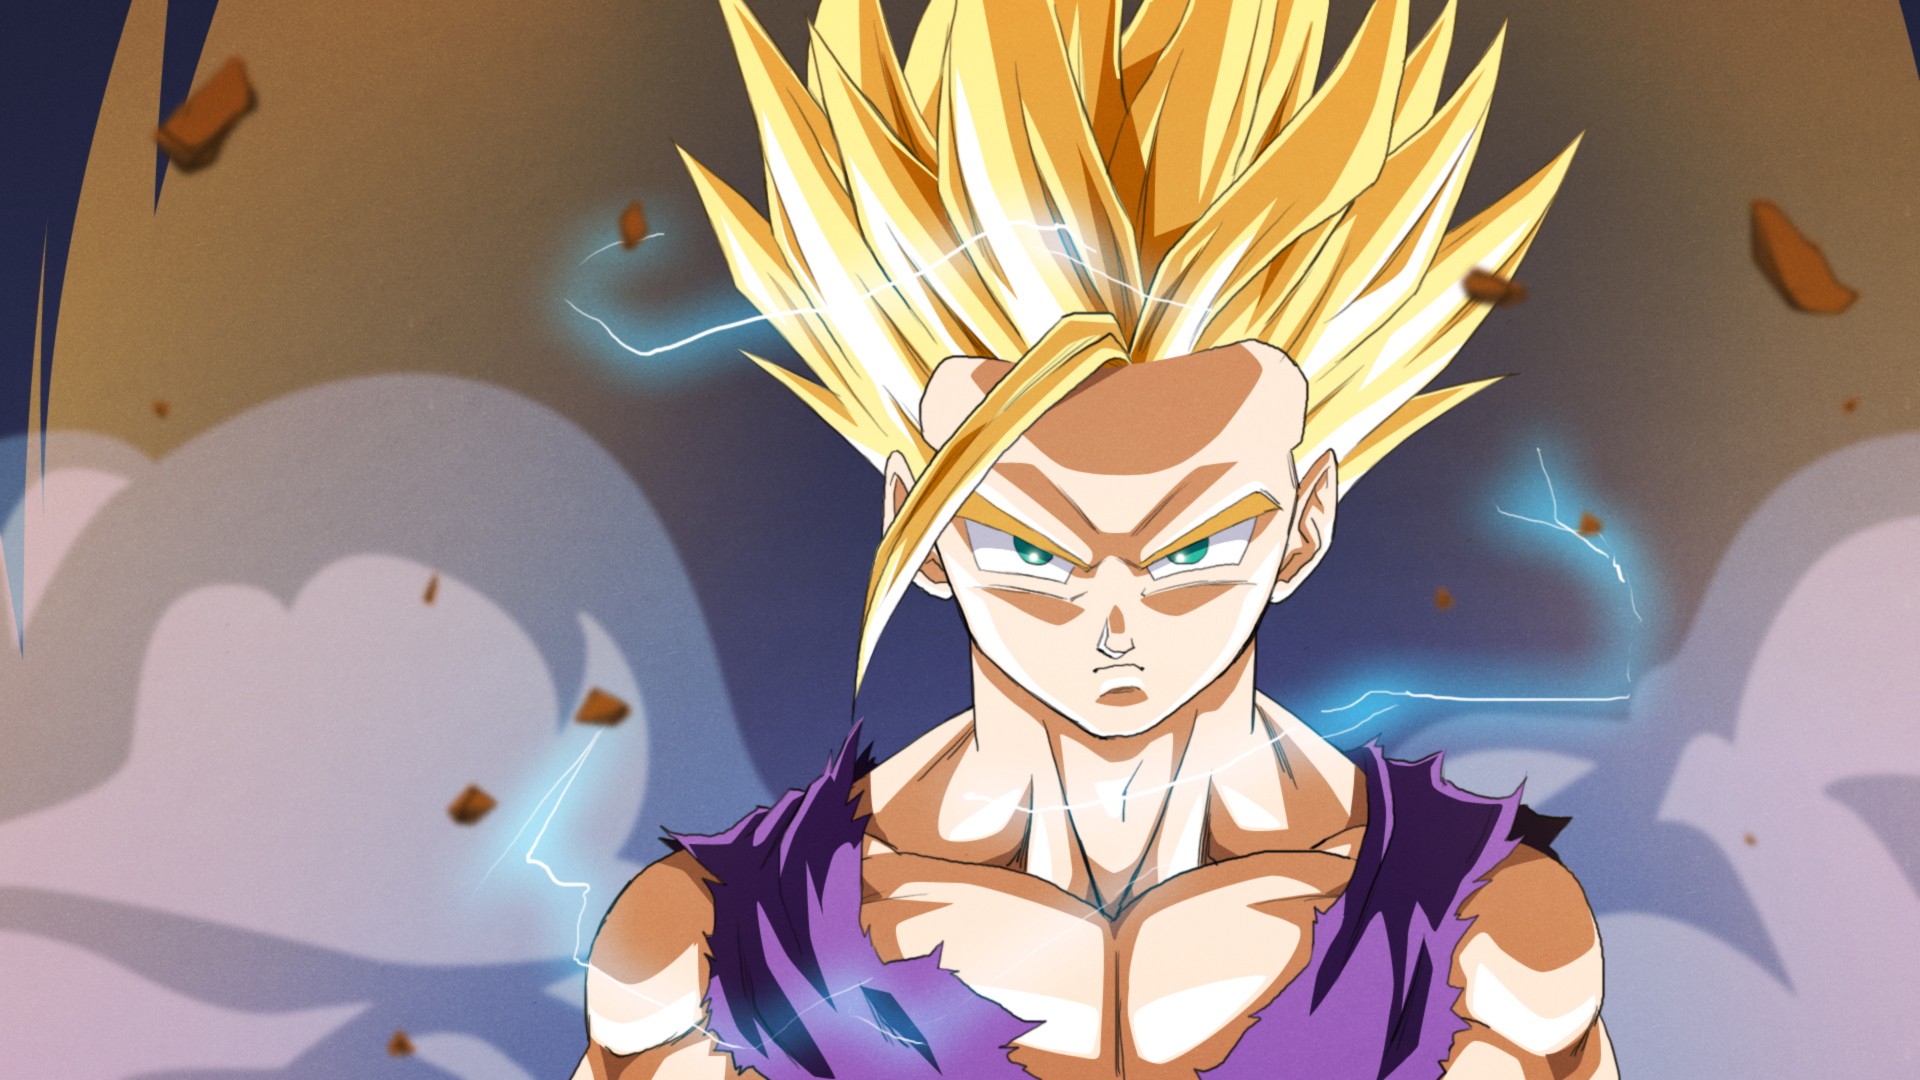 850+ Anime Dragon Ball Z HD Wallpapers and Backgrounds